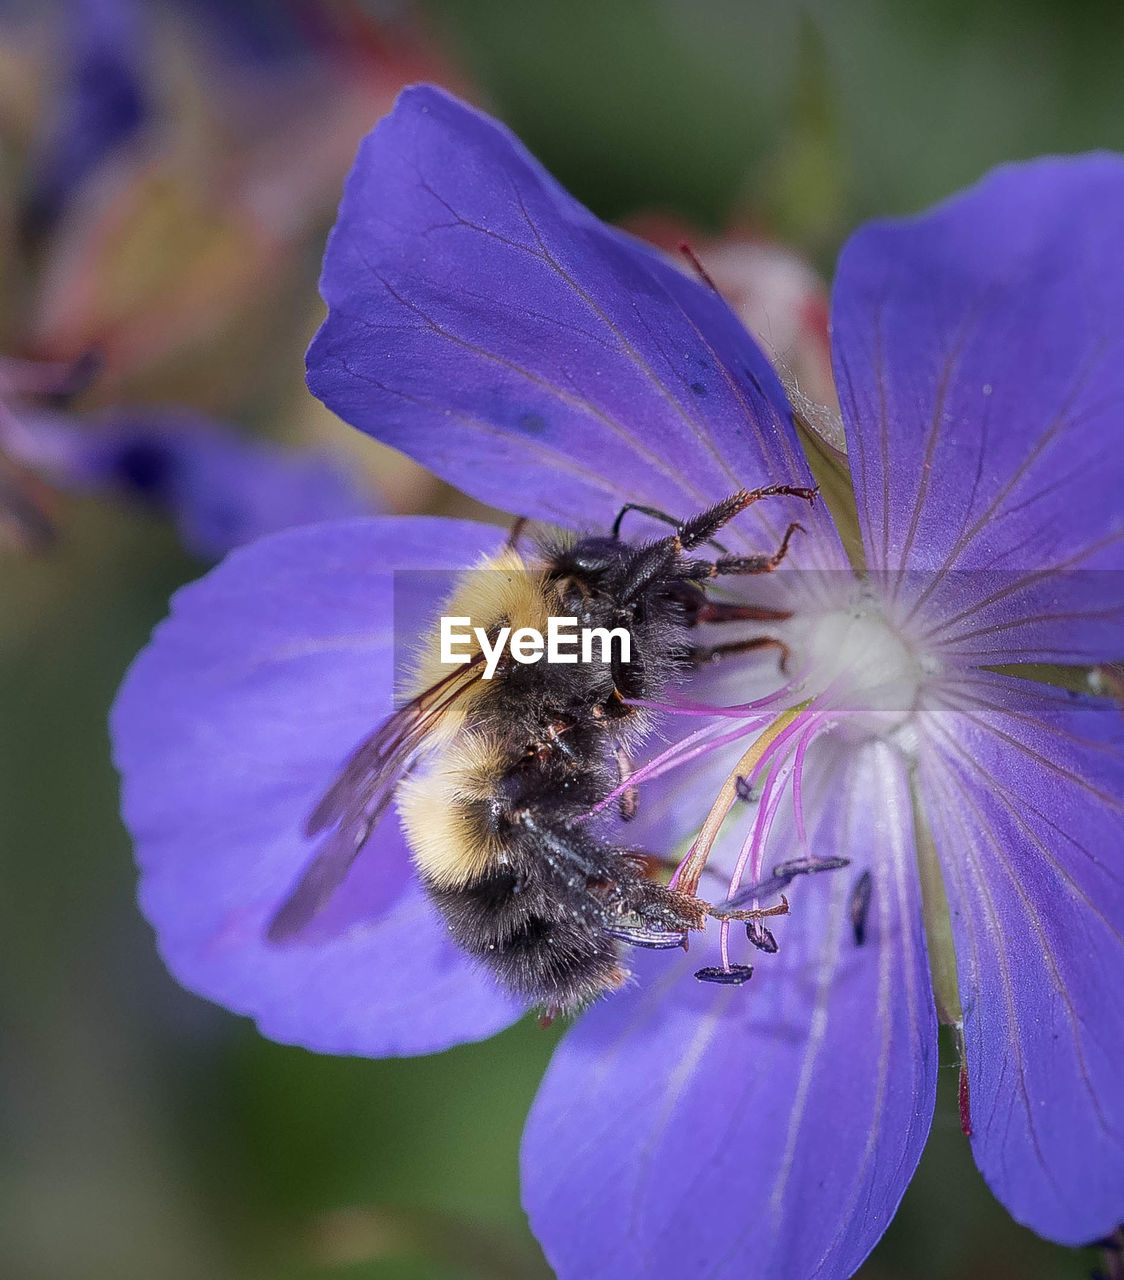 CLOSE-UP OF BUMBLEBEE ON PURPLE FLOWER